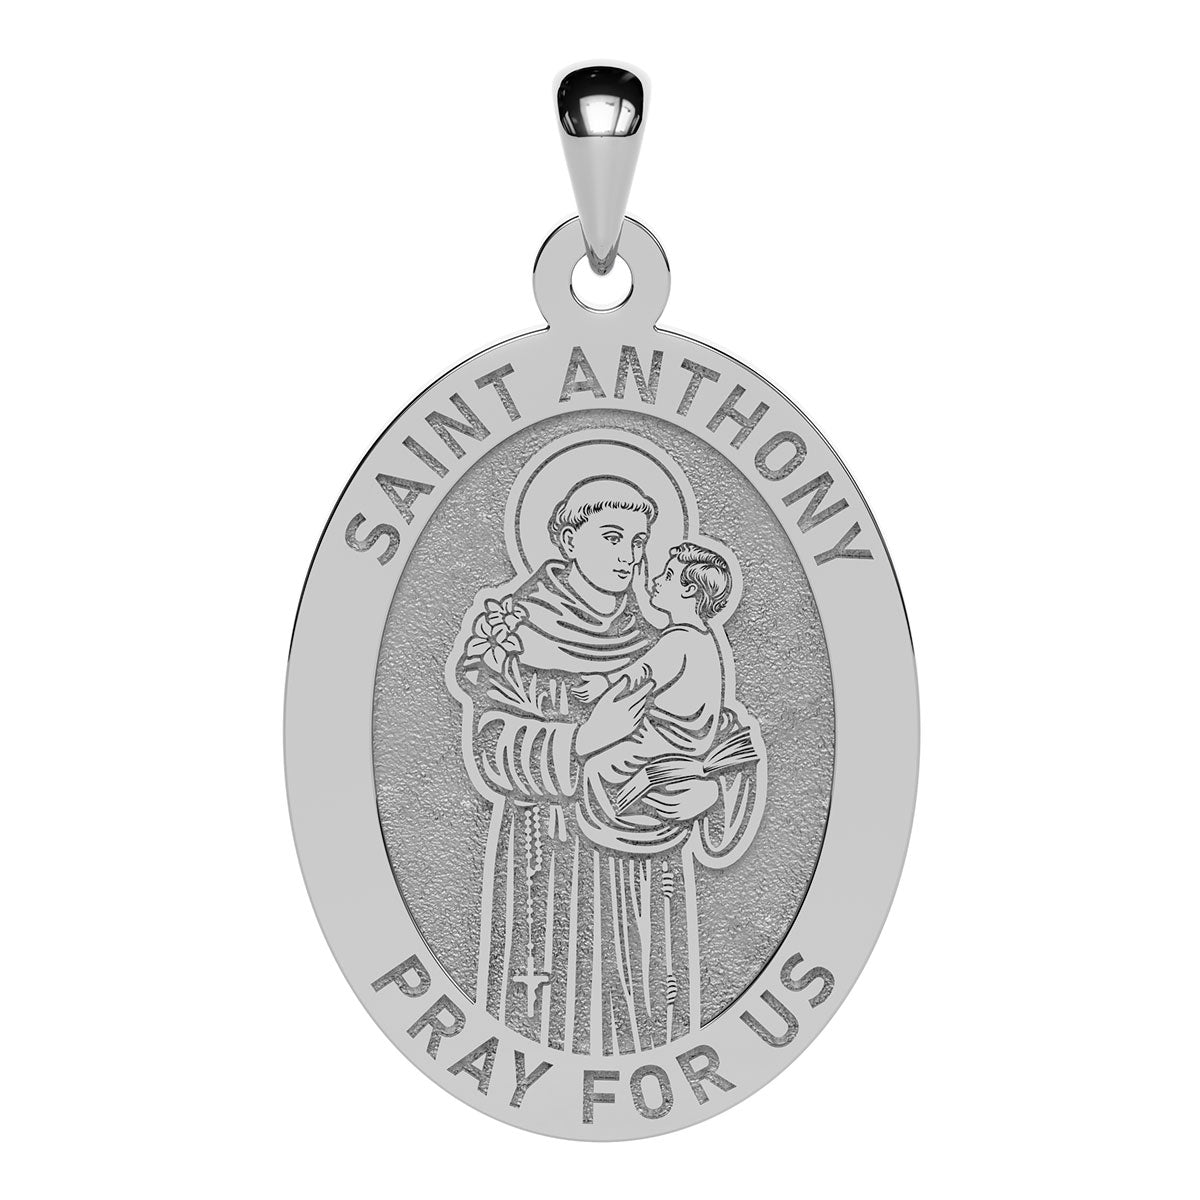 Saint Anthony Oval Religious Medal